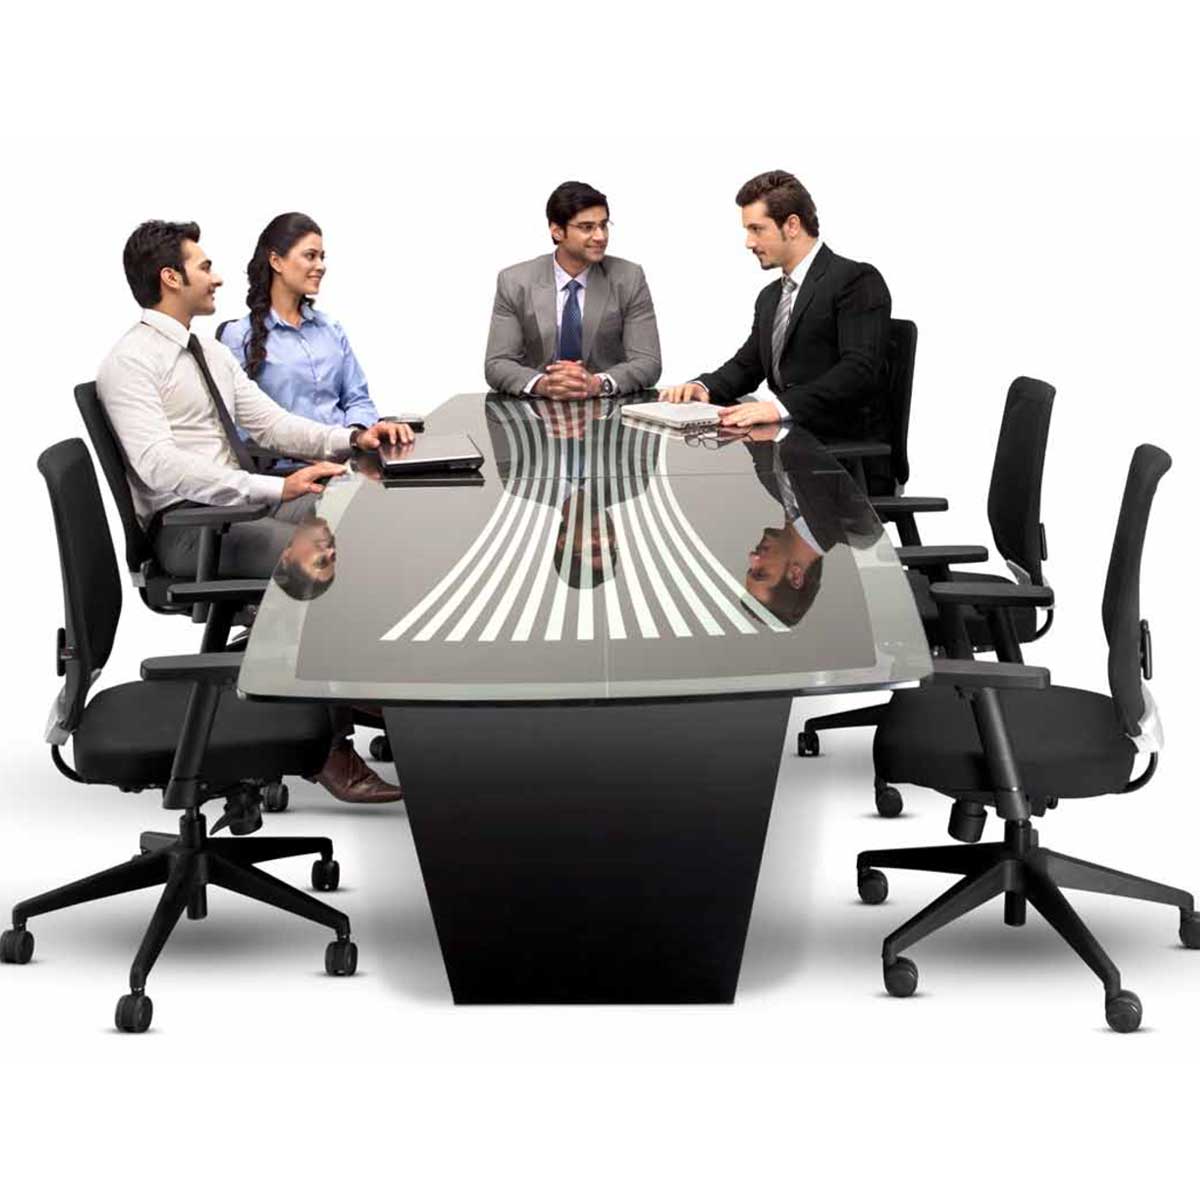 Conference table Manufacturers, Suppliers in Ber Sarai